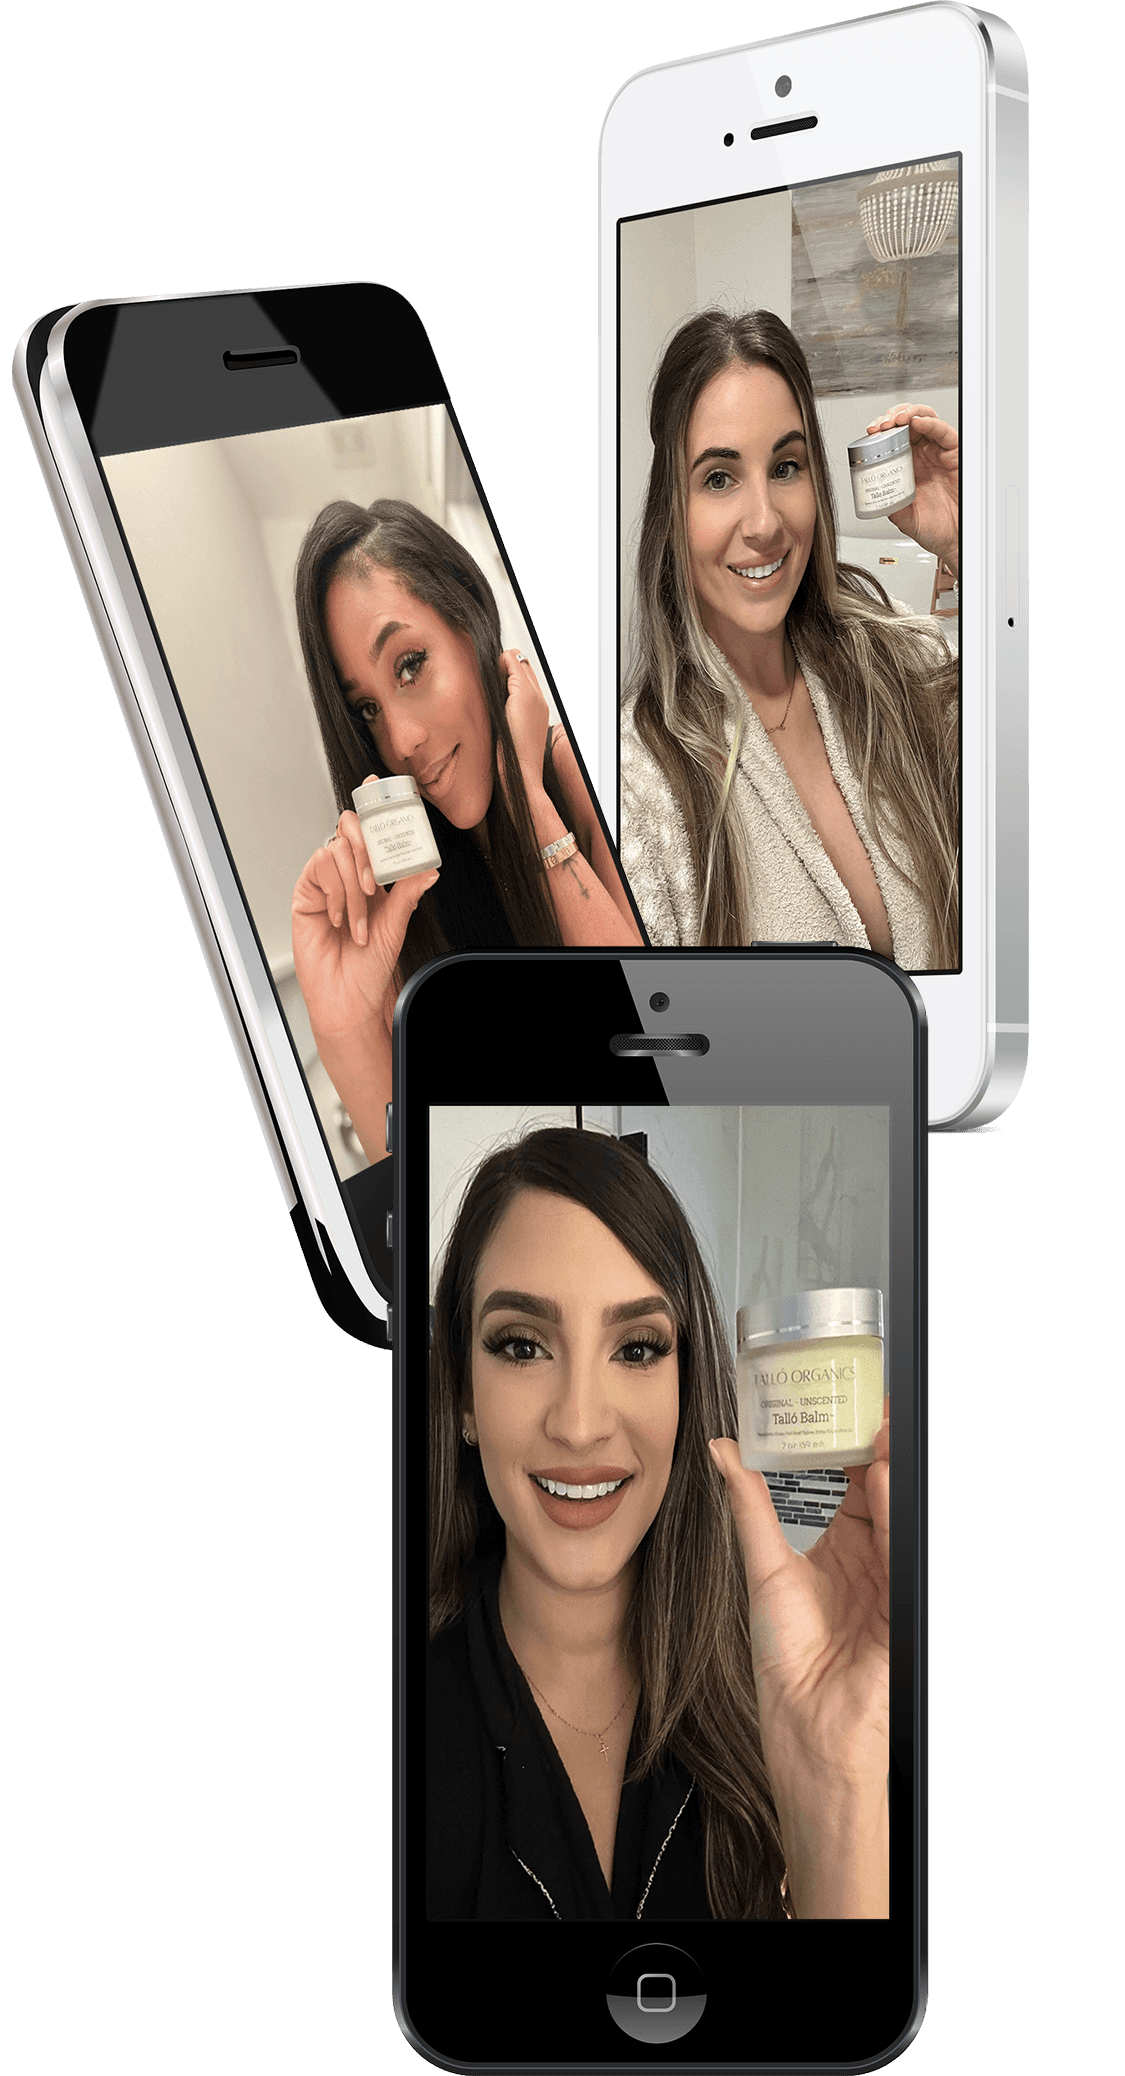 User photos where they users are holding their jars of Tallo Balm. Photos include: Bria Brown (Left), Fernanda Scherrer (Bottom), Jennifer Lack Hannan (Right)